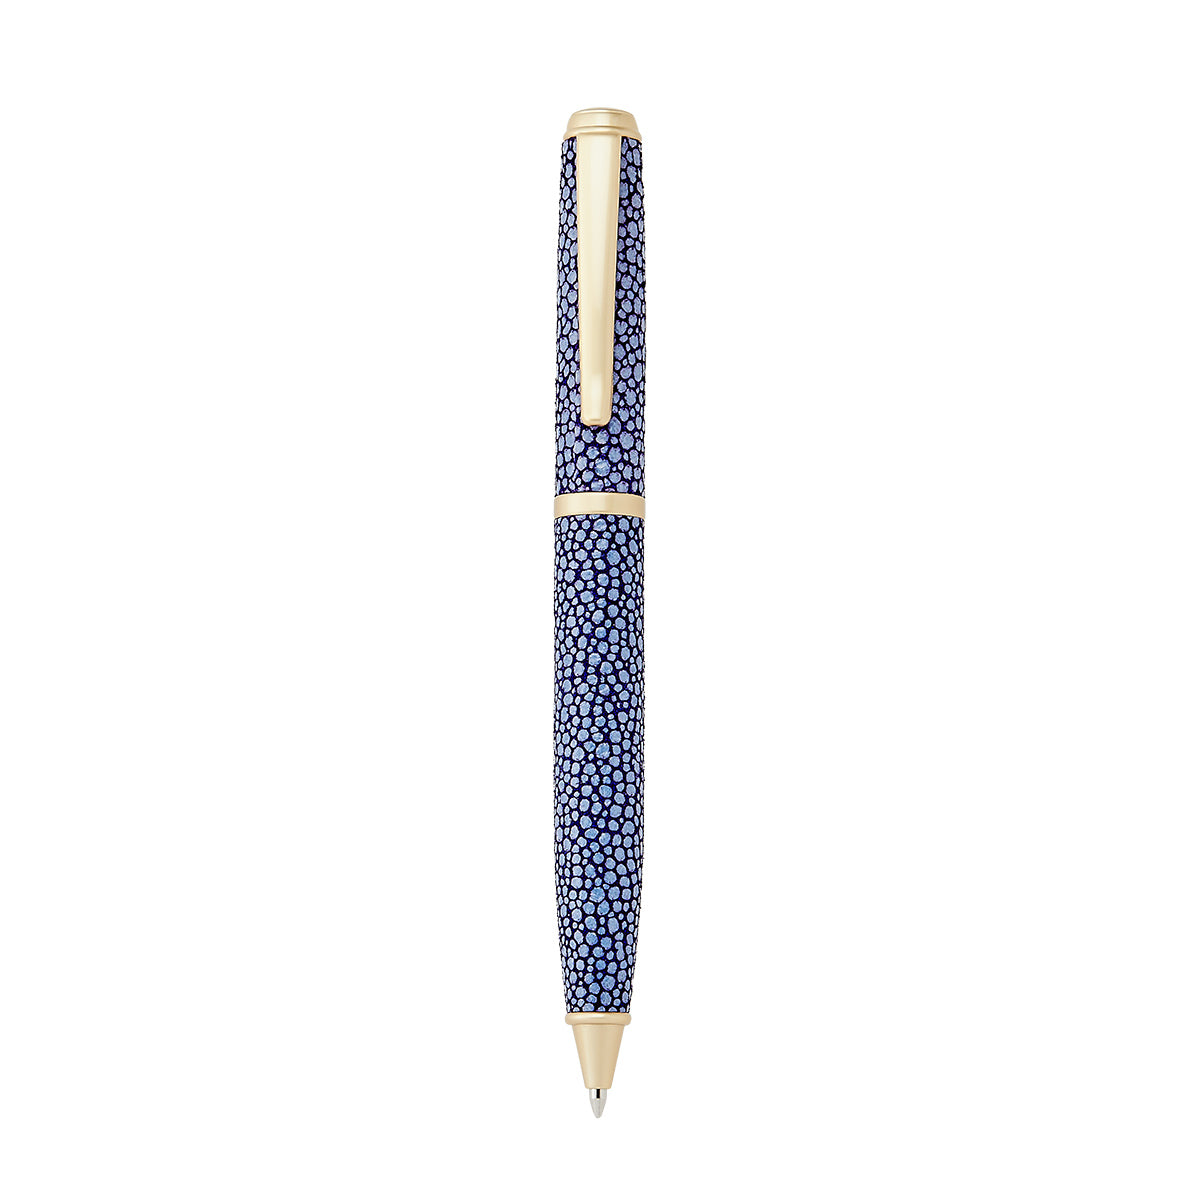 Graphic Image Leather Wrapped Pen Sapphire Pebble Shagreen Leather